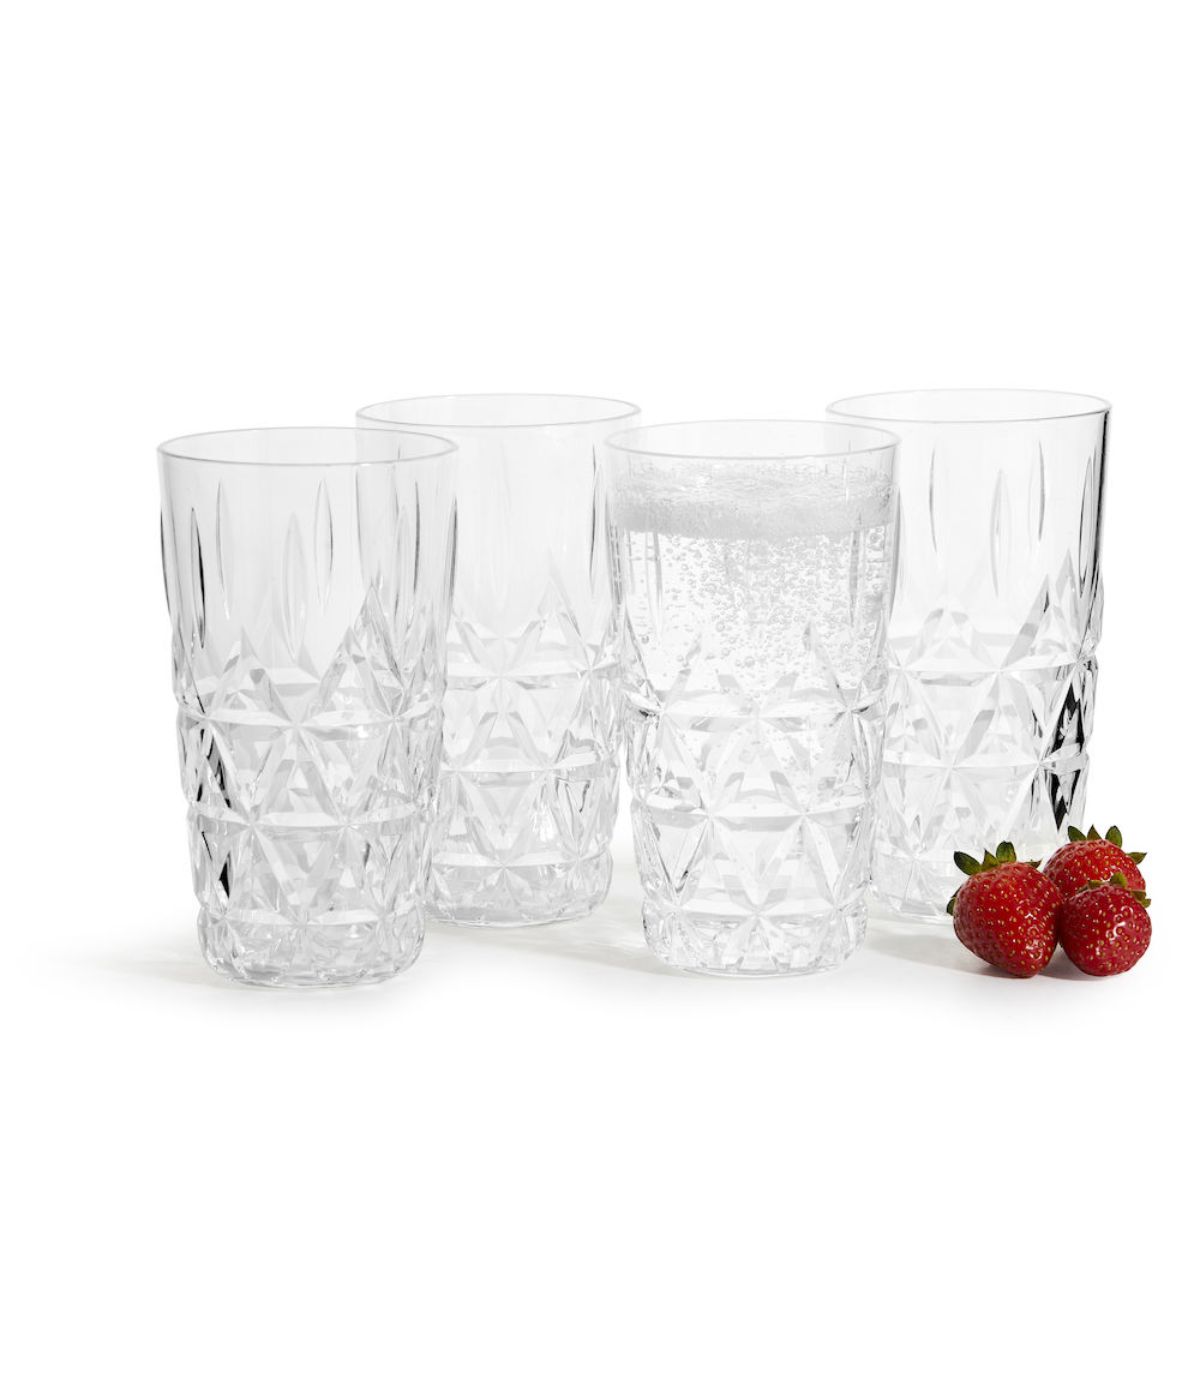 Sagaform By Widgeteer Picnic Outdoor Dinnerware Collection, Tumbler, Set of 4 Clear